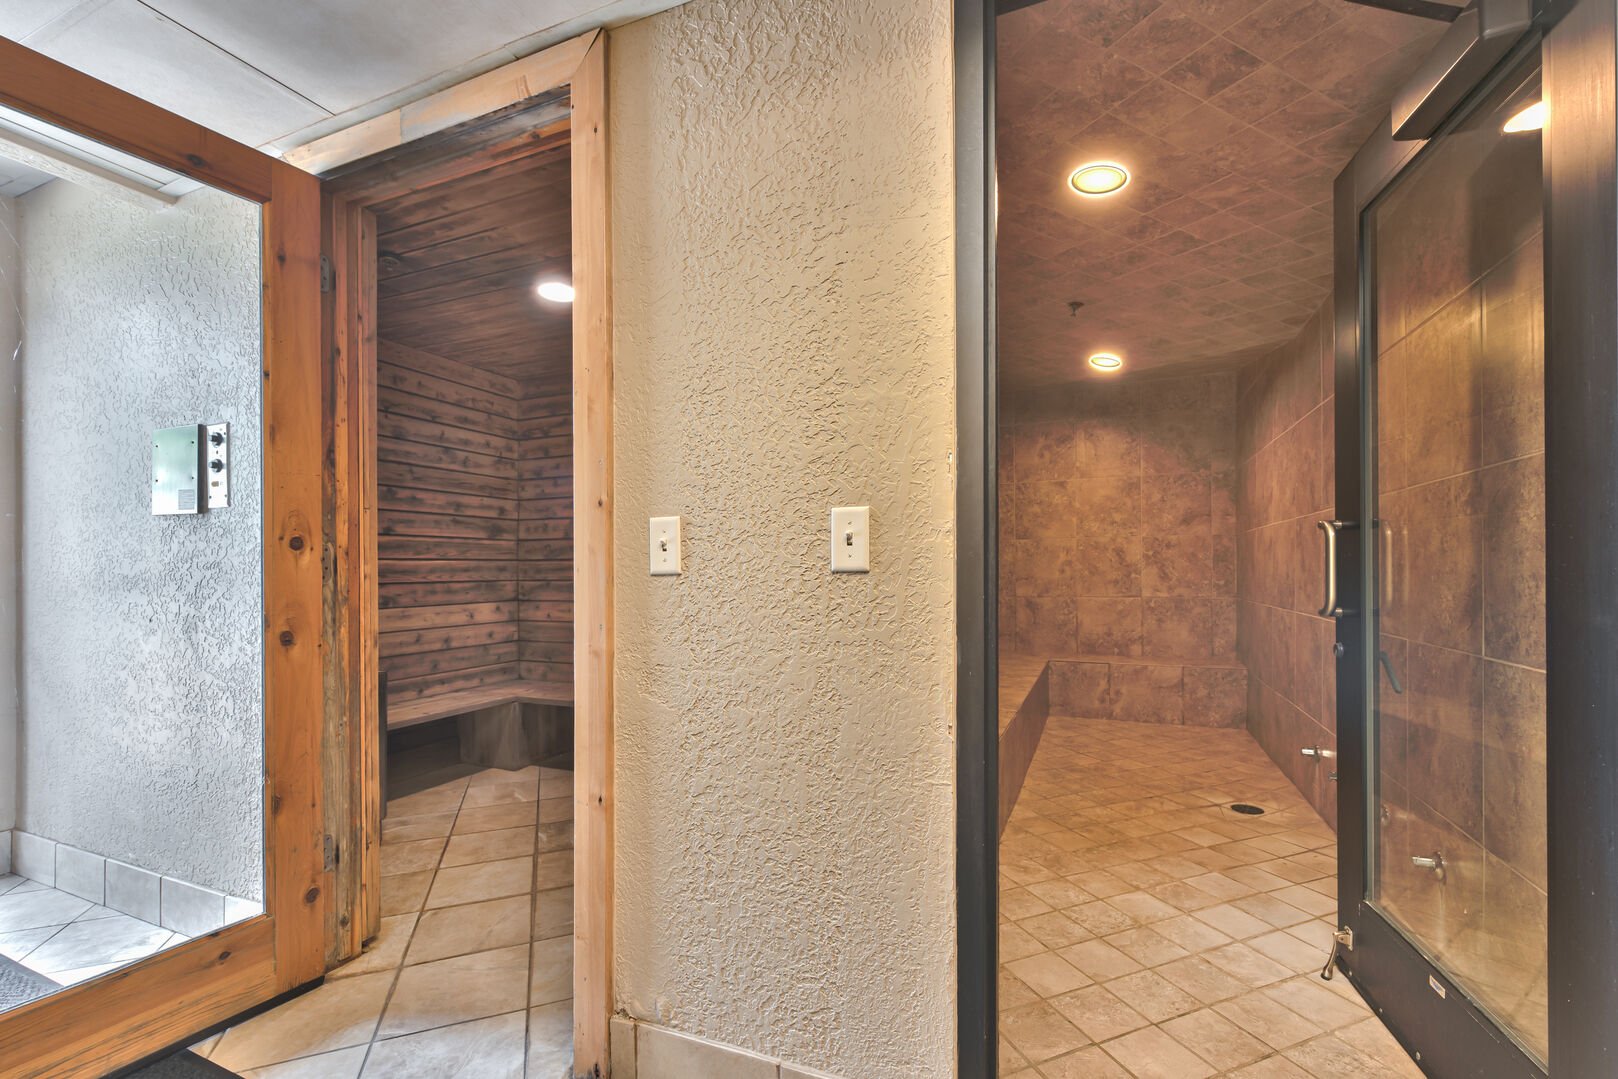 Both sauna and steam room area available